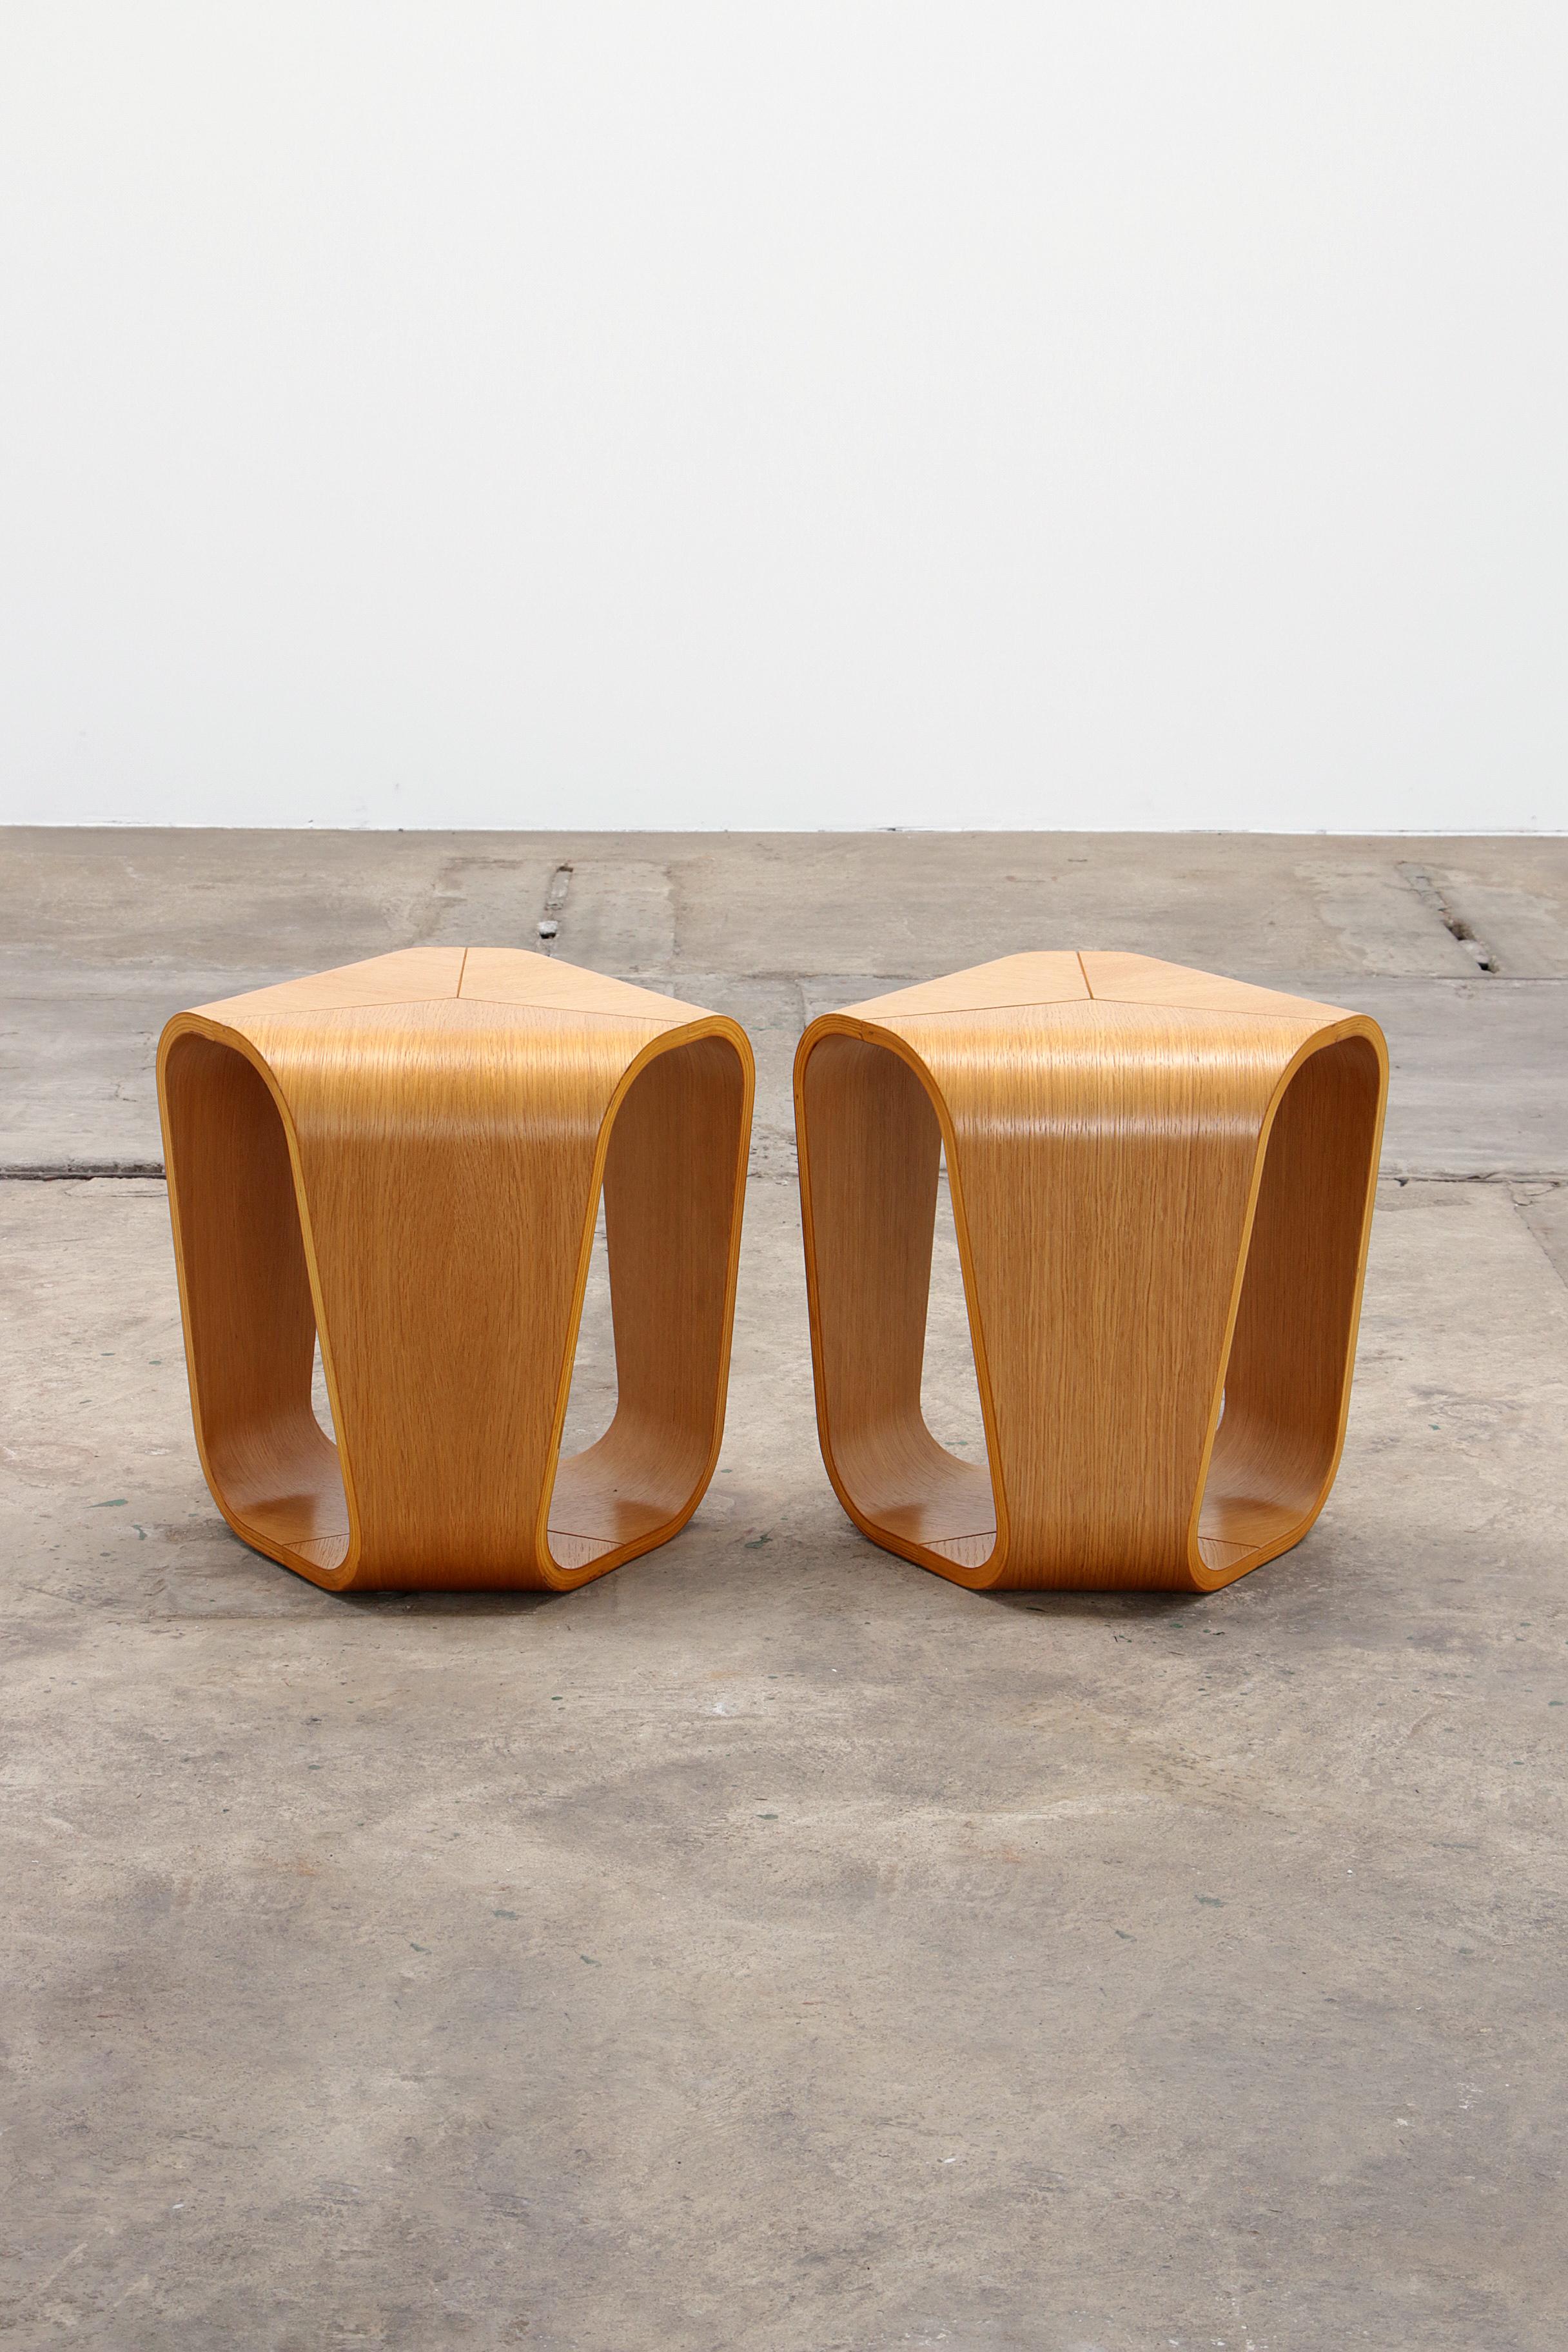 Italian Set of side tables by Enrico Cesana by Busnelli, 1990 Italy.